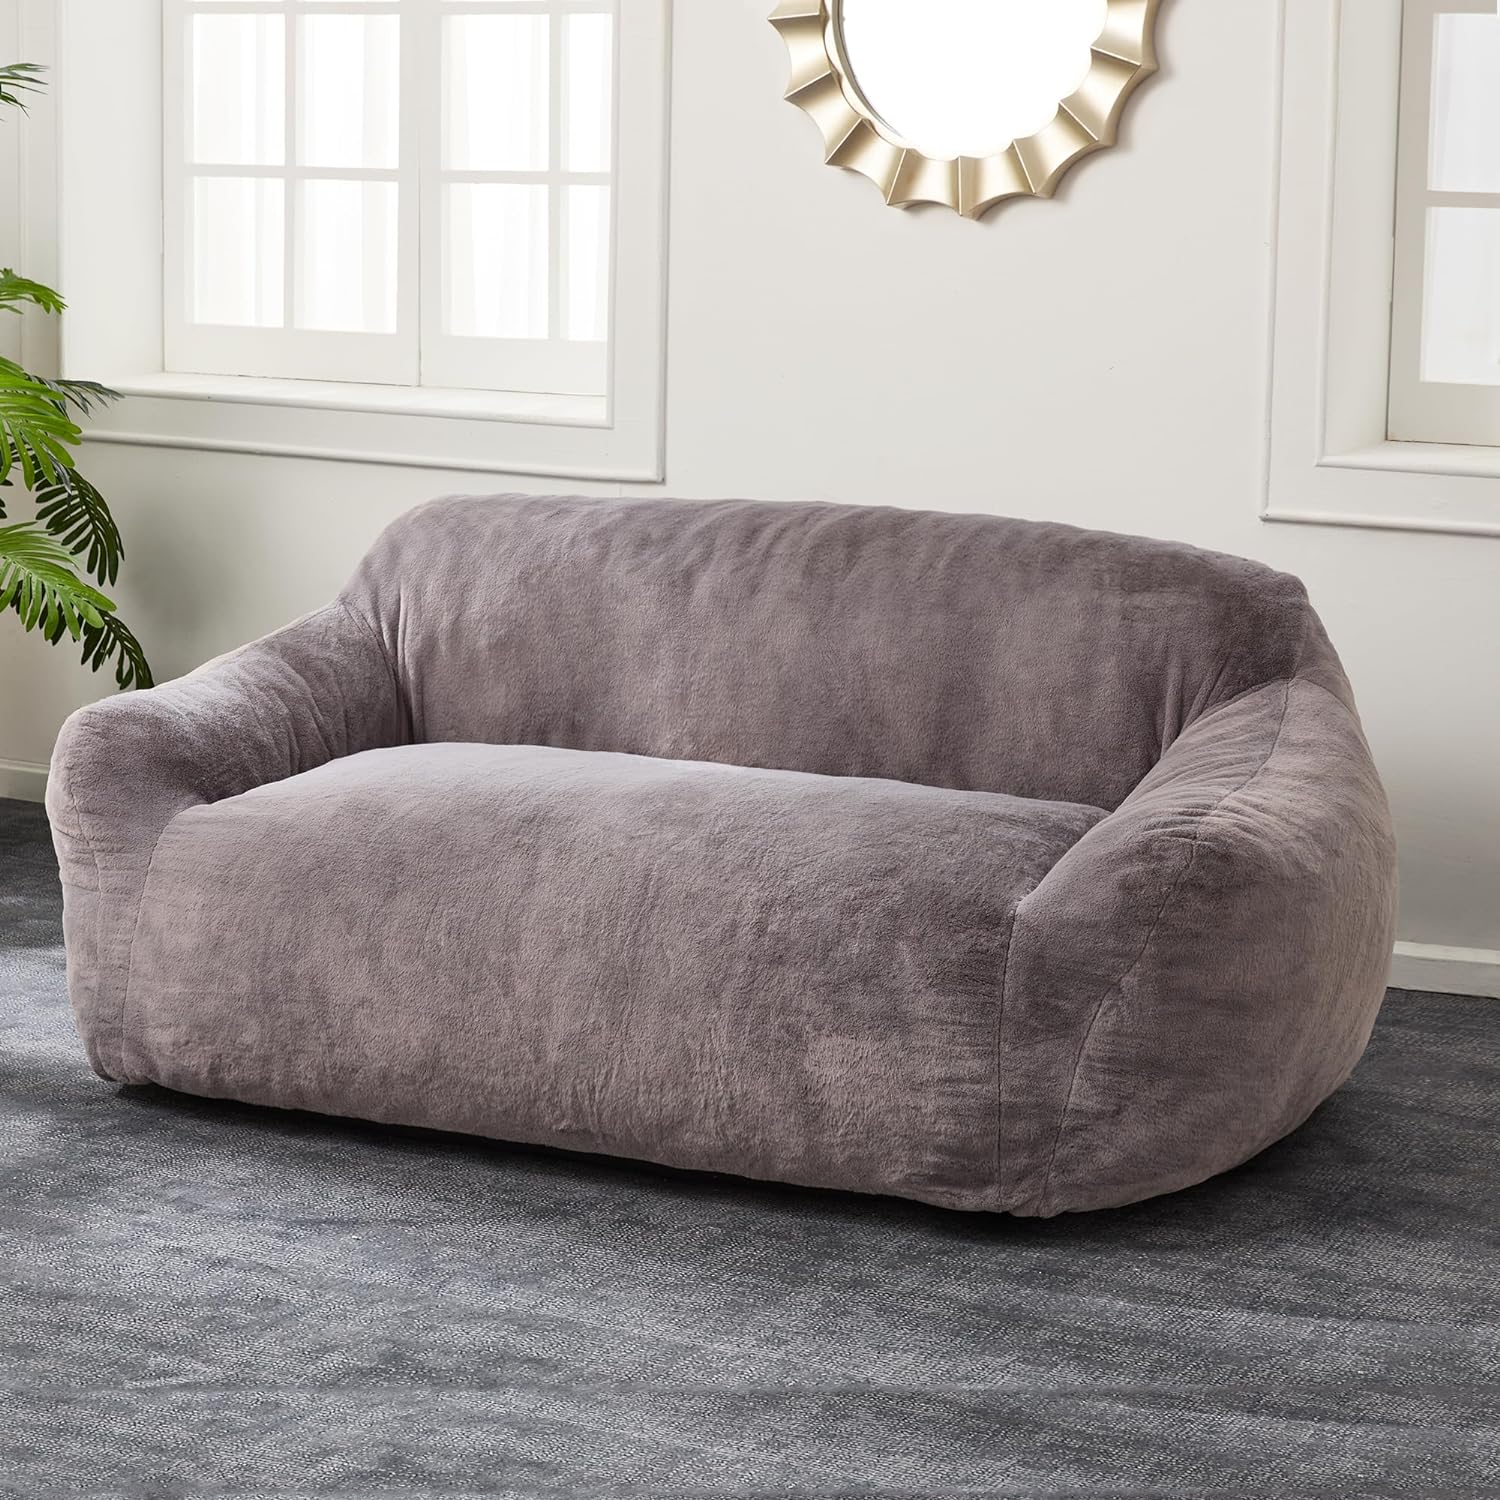 Homguava Sofa Couch, Futon Couch Bed with Armrest, 2-Seater Loveseat Sofa Soft Faux Fur Sleeper Sofa, Small Couchs for Living Room,Bedroom,Apartment (Grey)